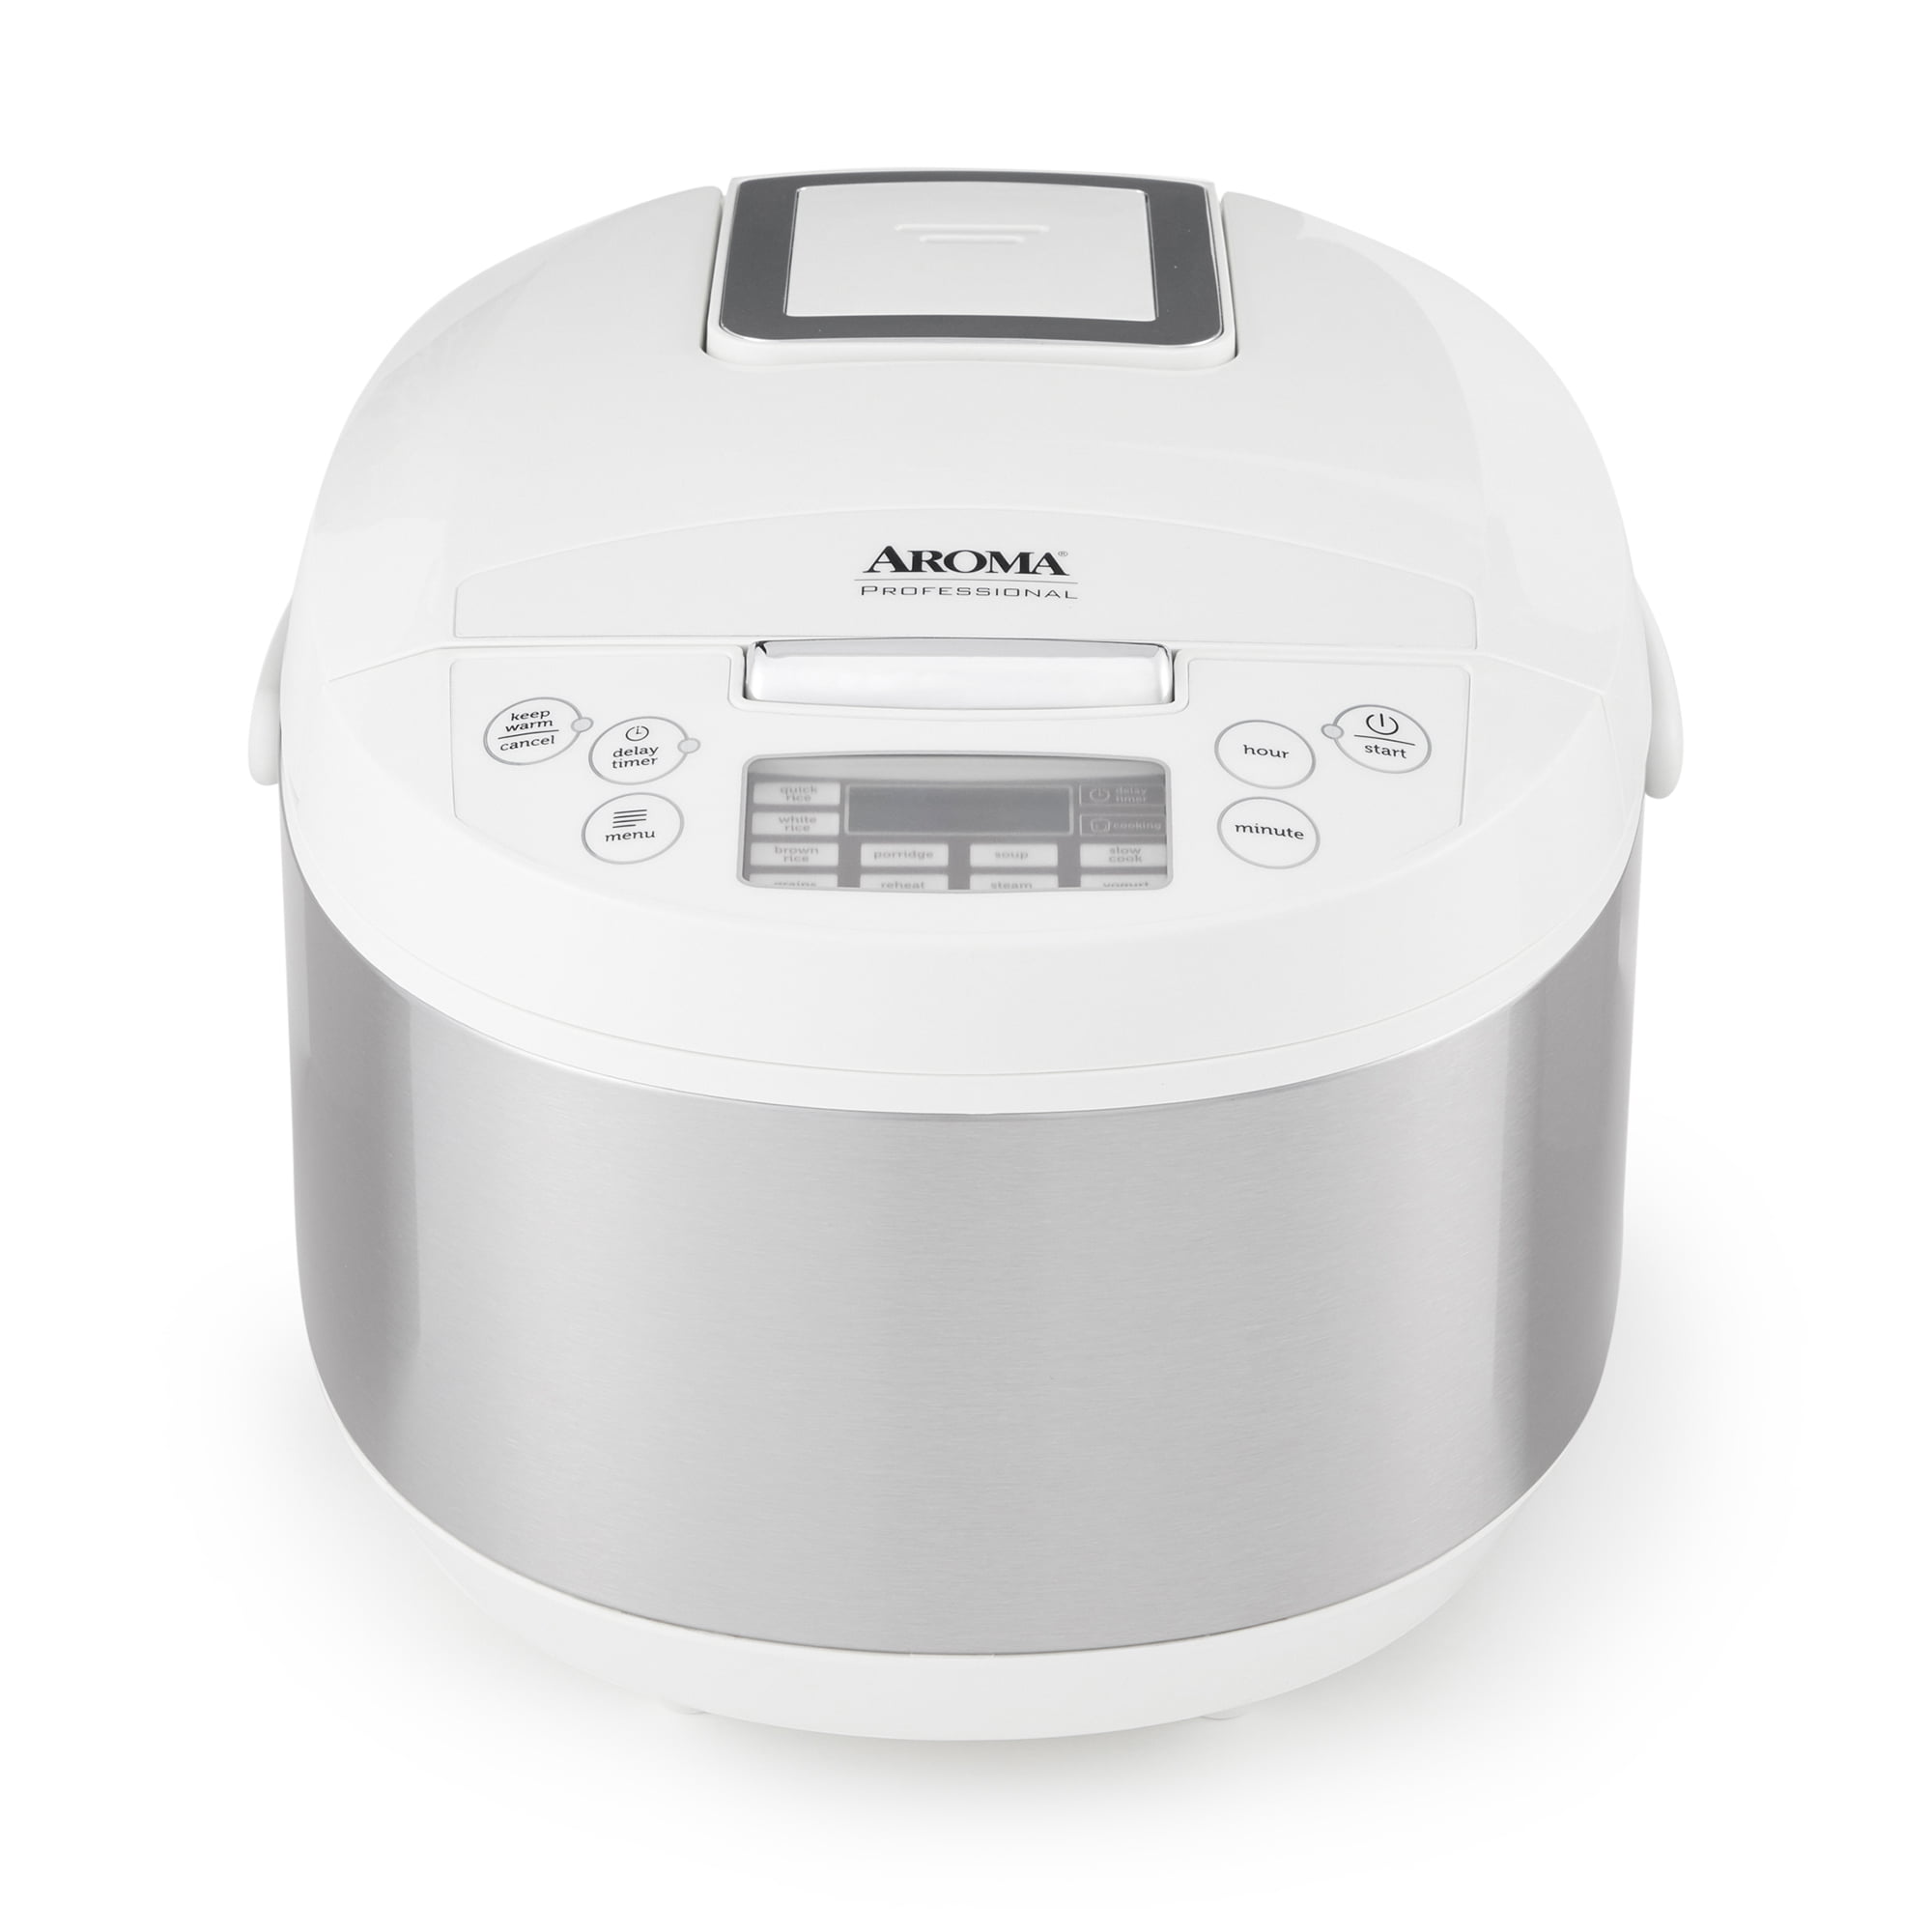 Aroma Professional 10 Cup Capacity Rice Cooker / Slow Steam Multi-Piece  M6190465